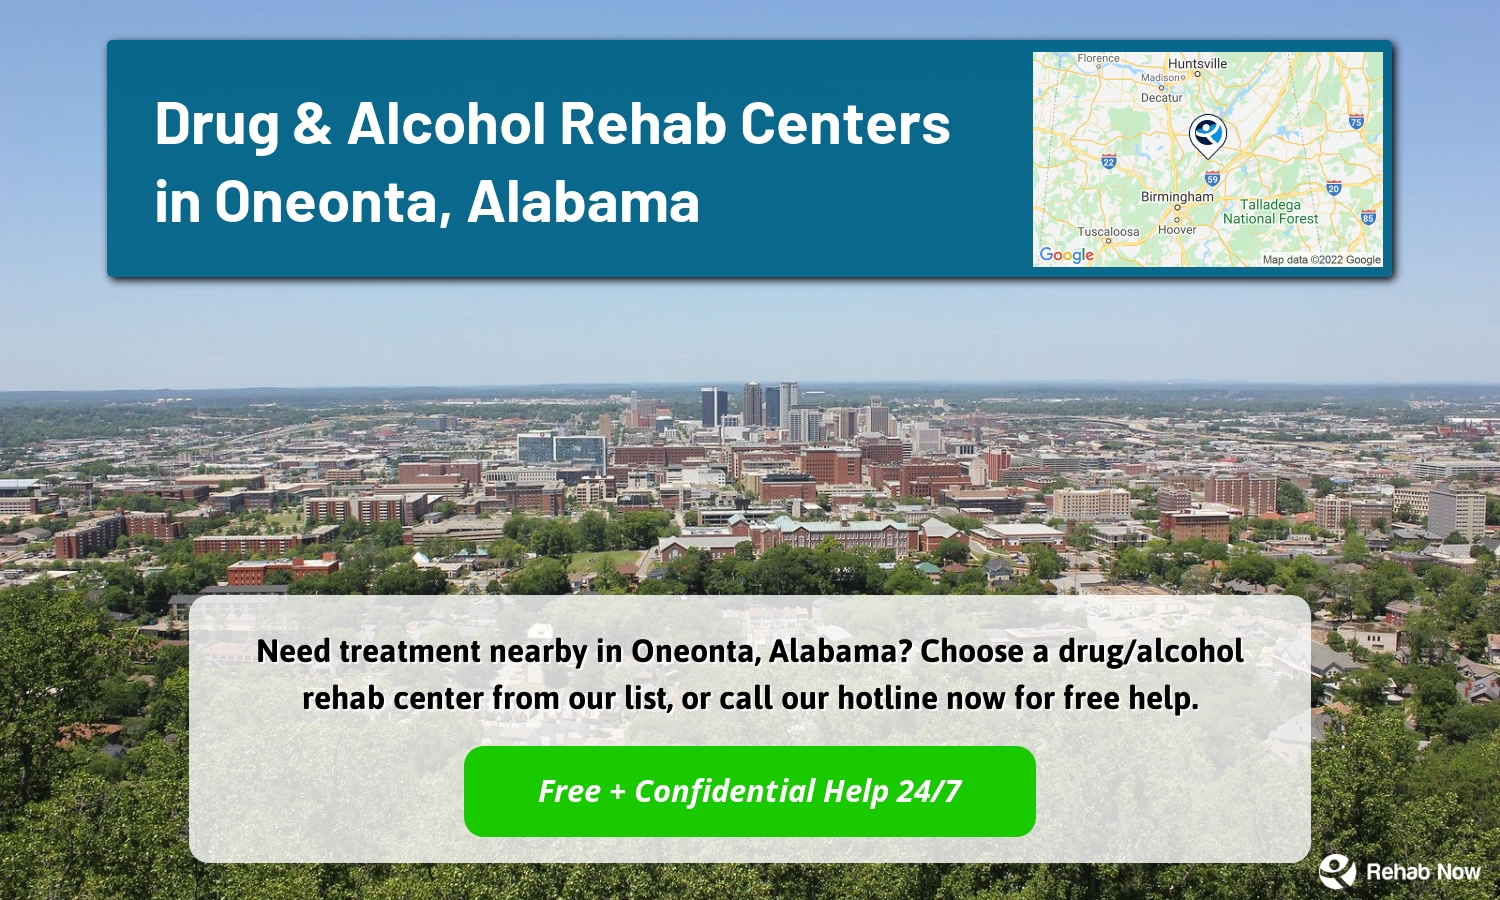 Need treatment nearby in Oneonta, Alabama? Choose a drug/alcohol rehab center from our list, or call our hotline now for free help.